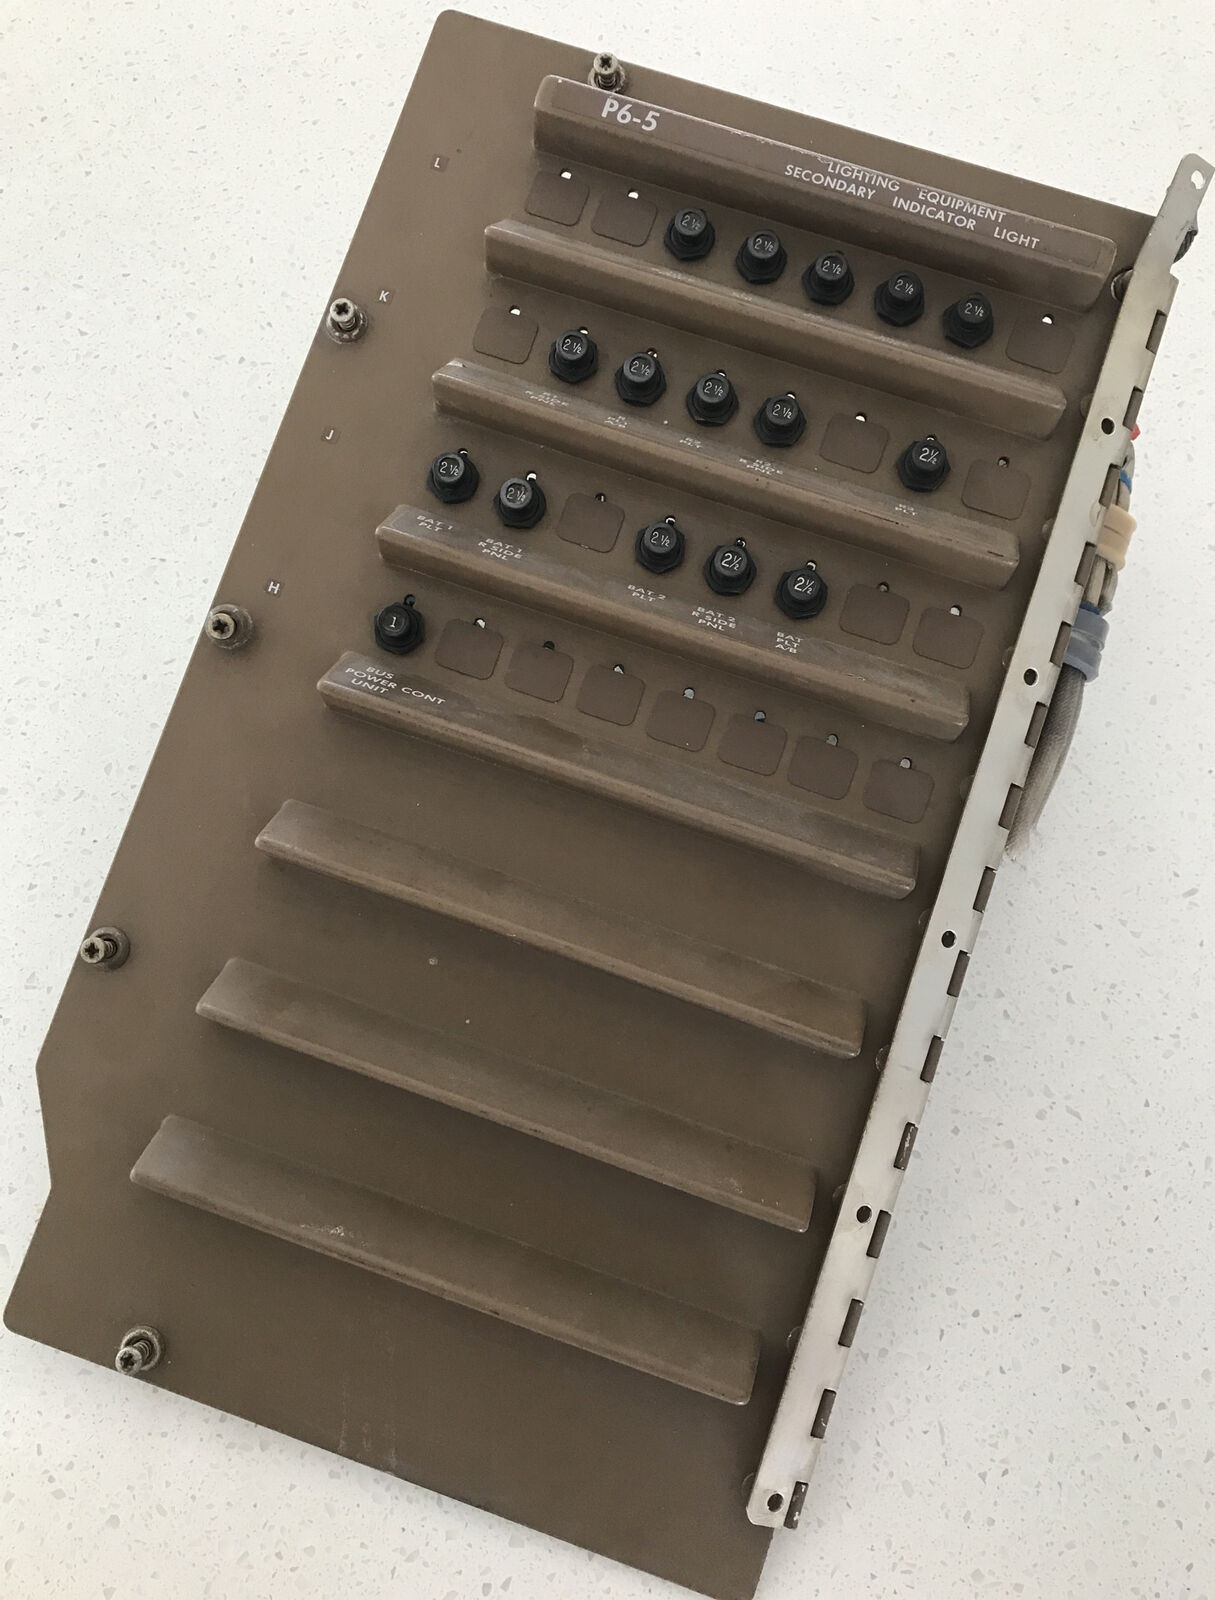 Boeing 757/767 Circuit Breaker Wall Panel (Section P6-5)